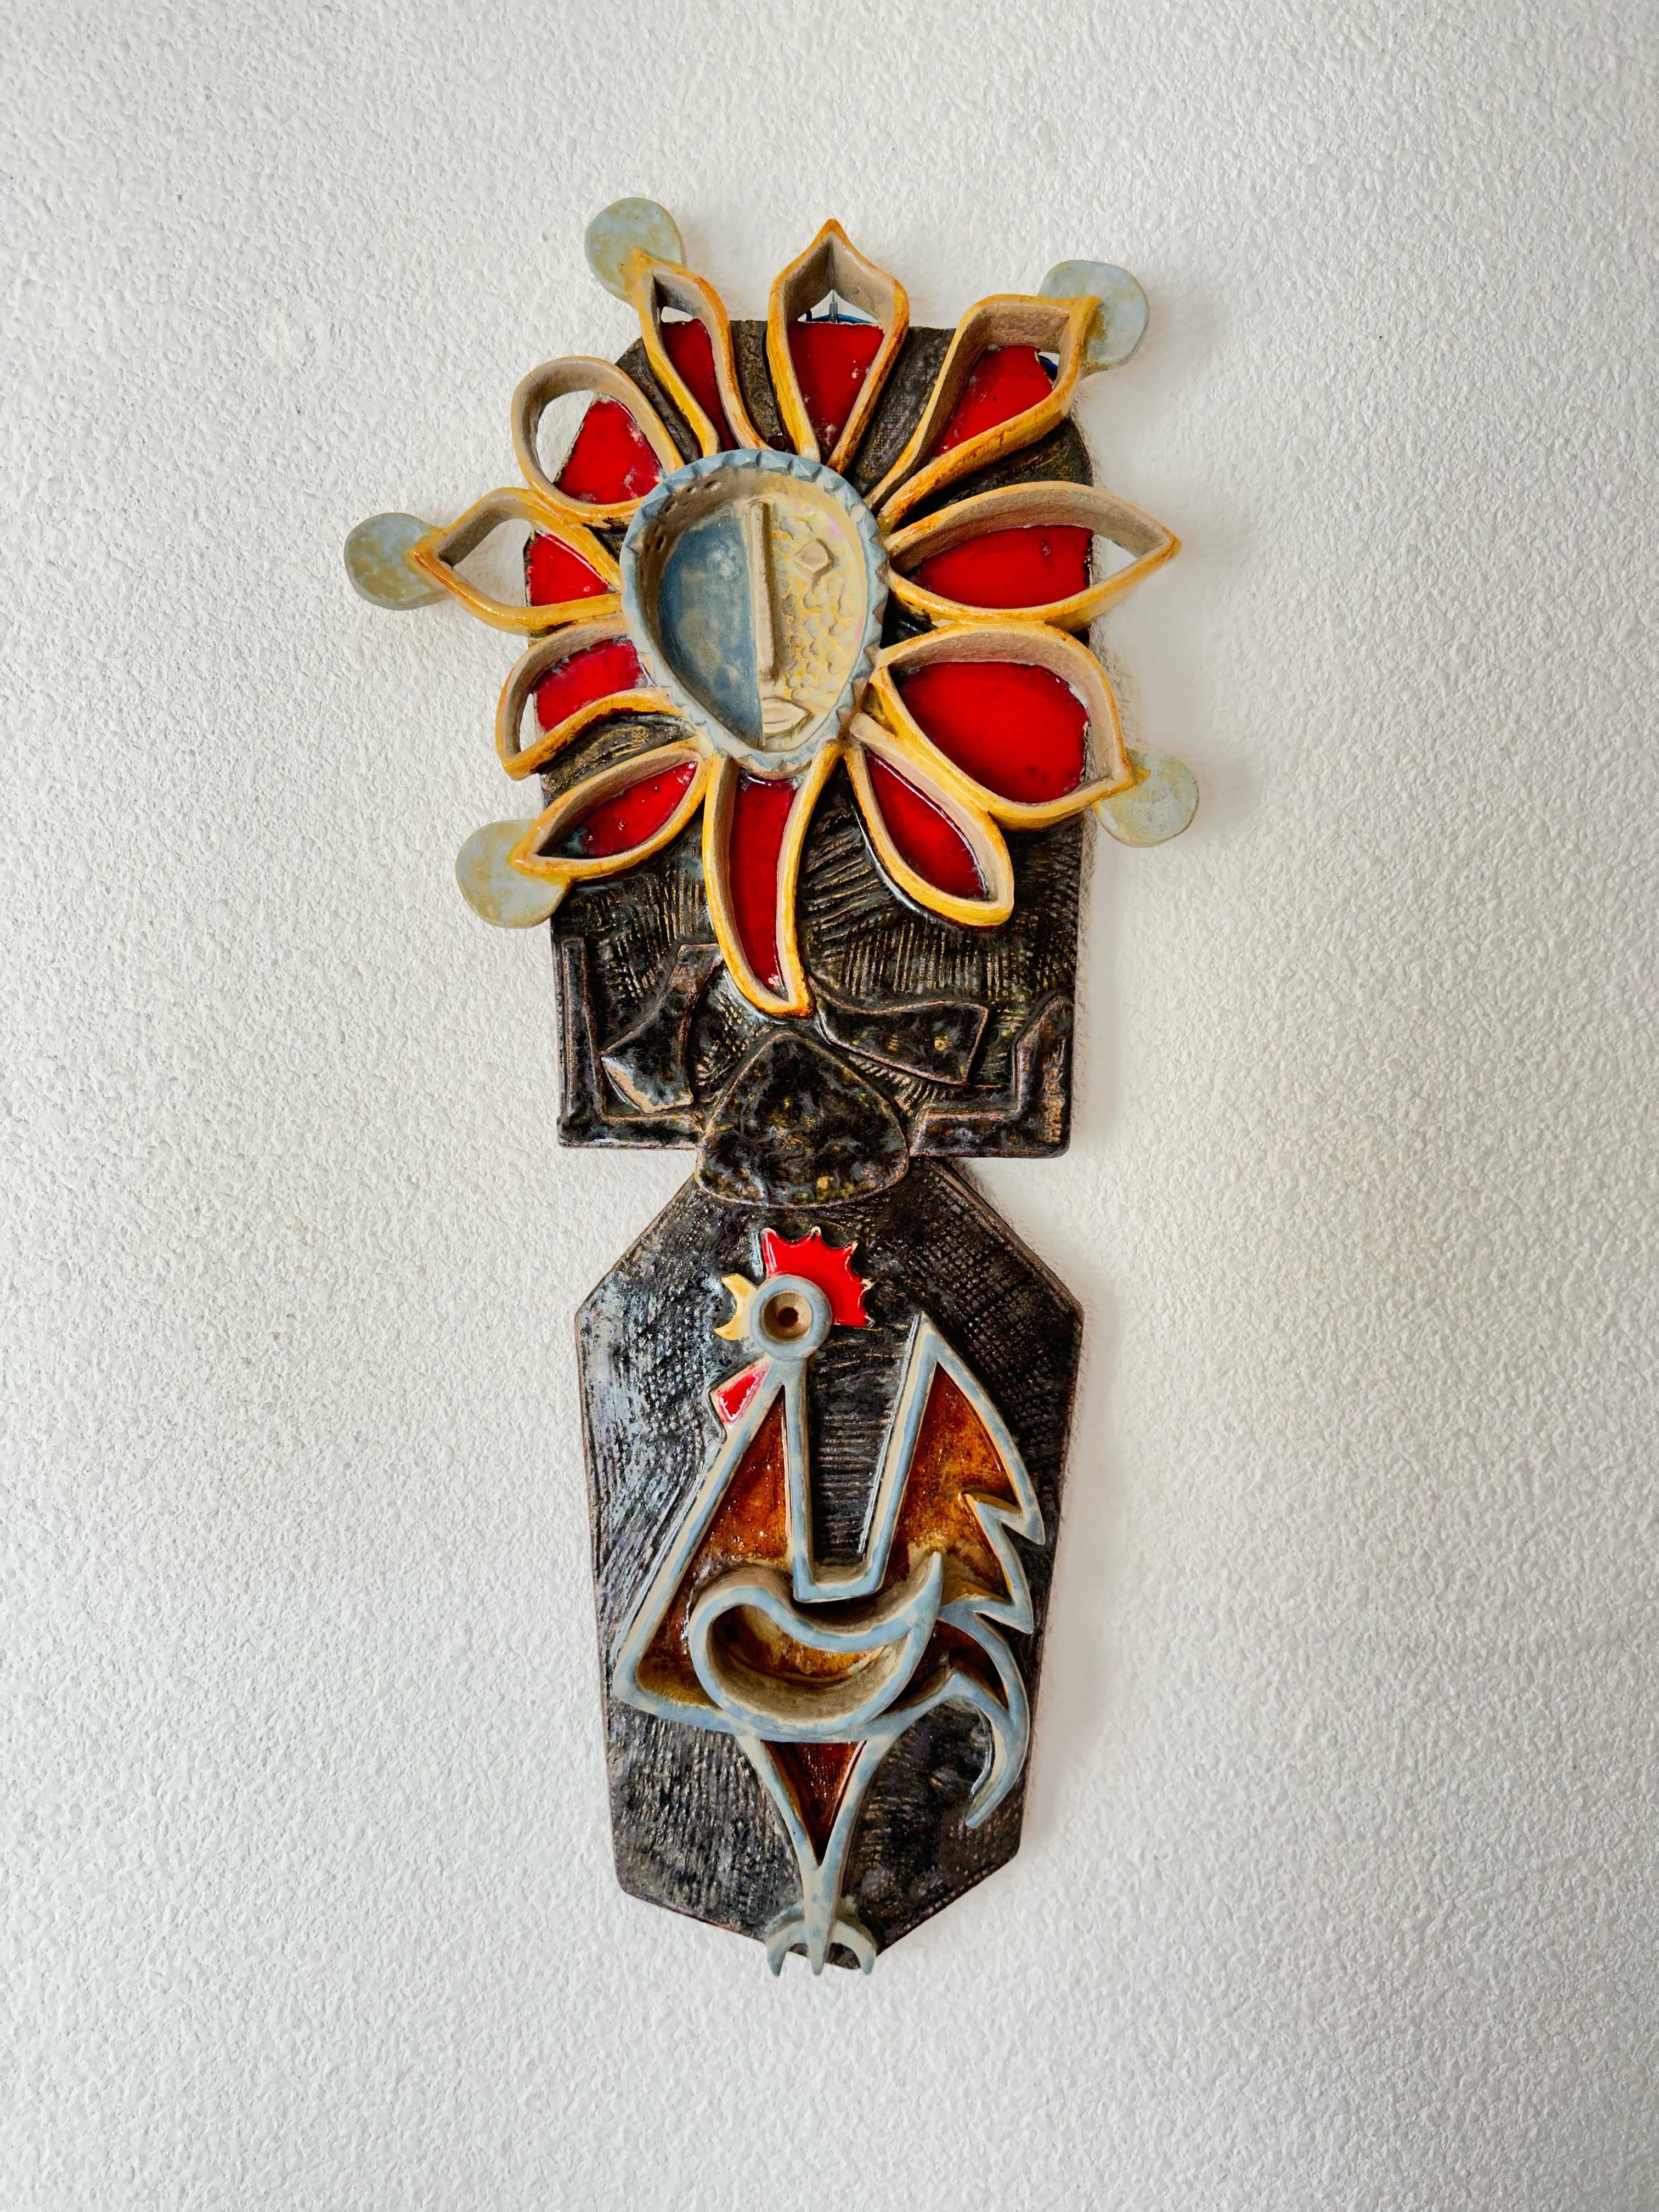 THE CROW OF THE COCK.

Unique work and very decorative.

Cock and Sun ceramic wall panel. 

Made by a R. MAREZ, French ceramist based in Vallauris ( South of France ).

Amazing colors and enamel work.

signed on the front R.MAREZ.

Big